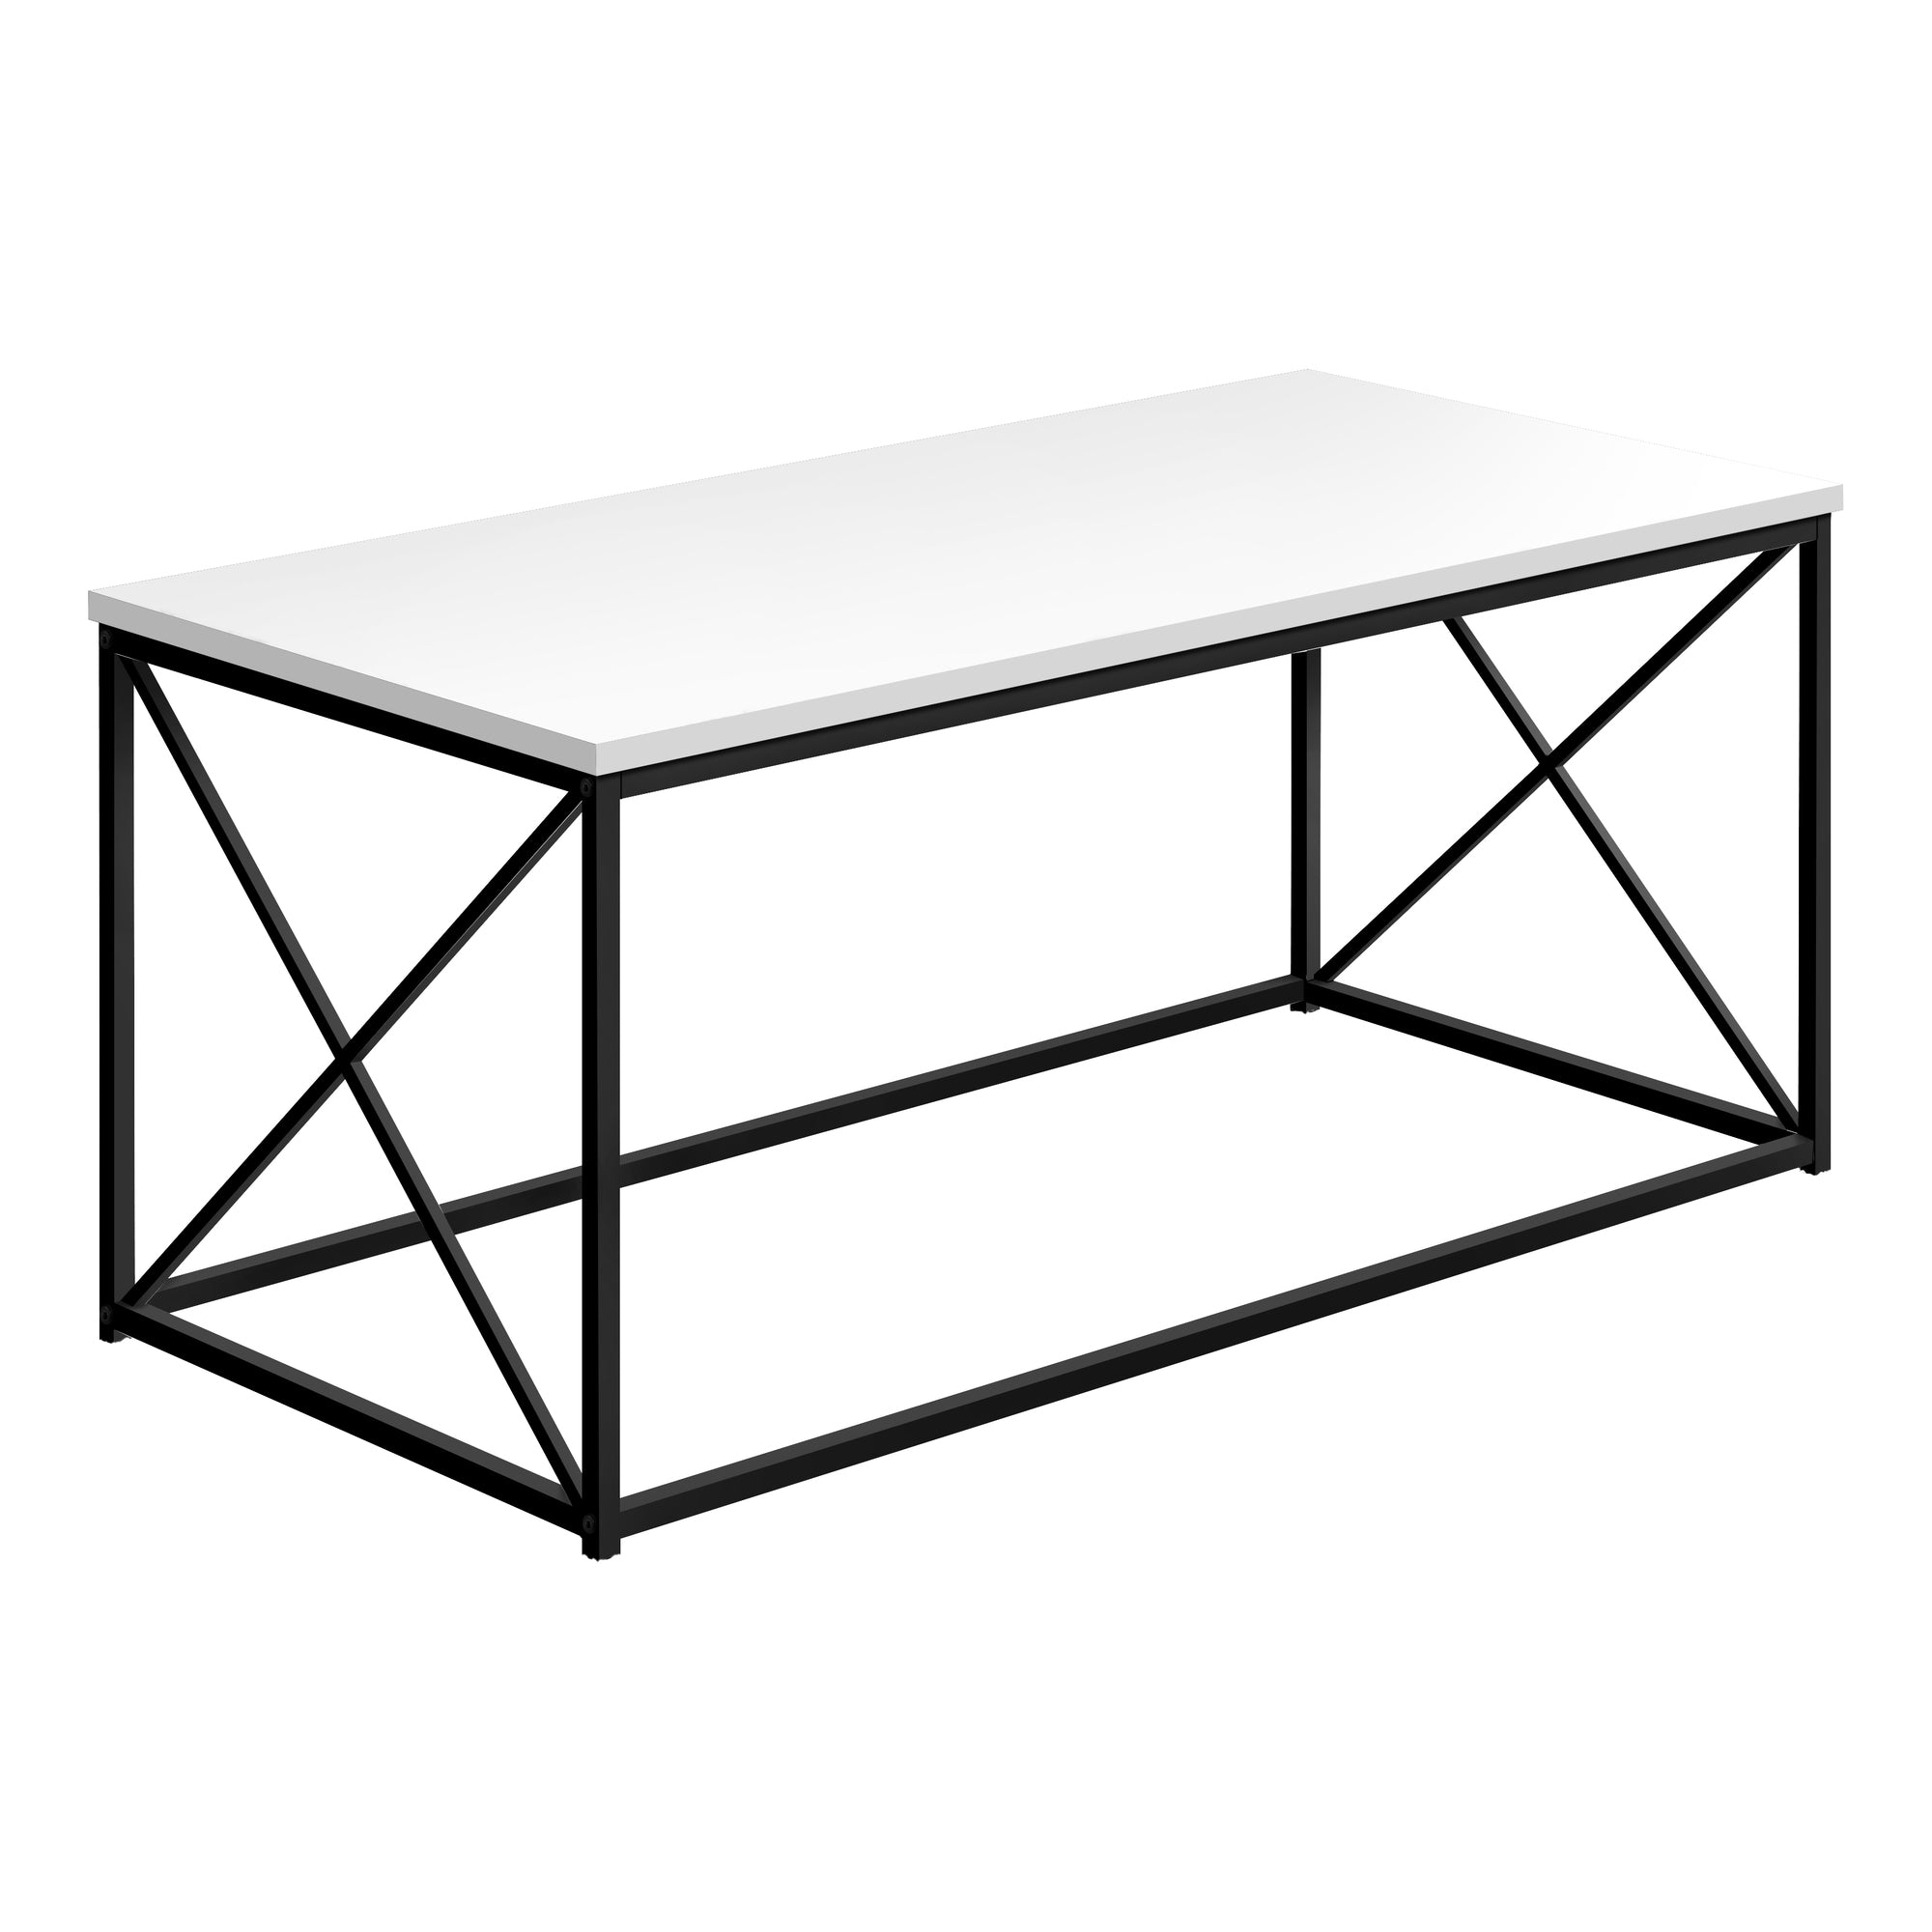 MN-533780    Coffee Table - Rectangular / Metal Base With X-Shaped Sides - 40"L - White / Black